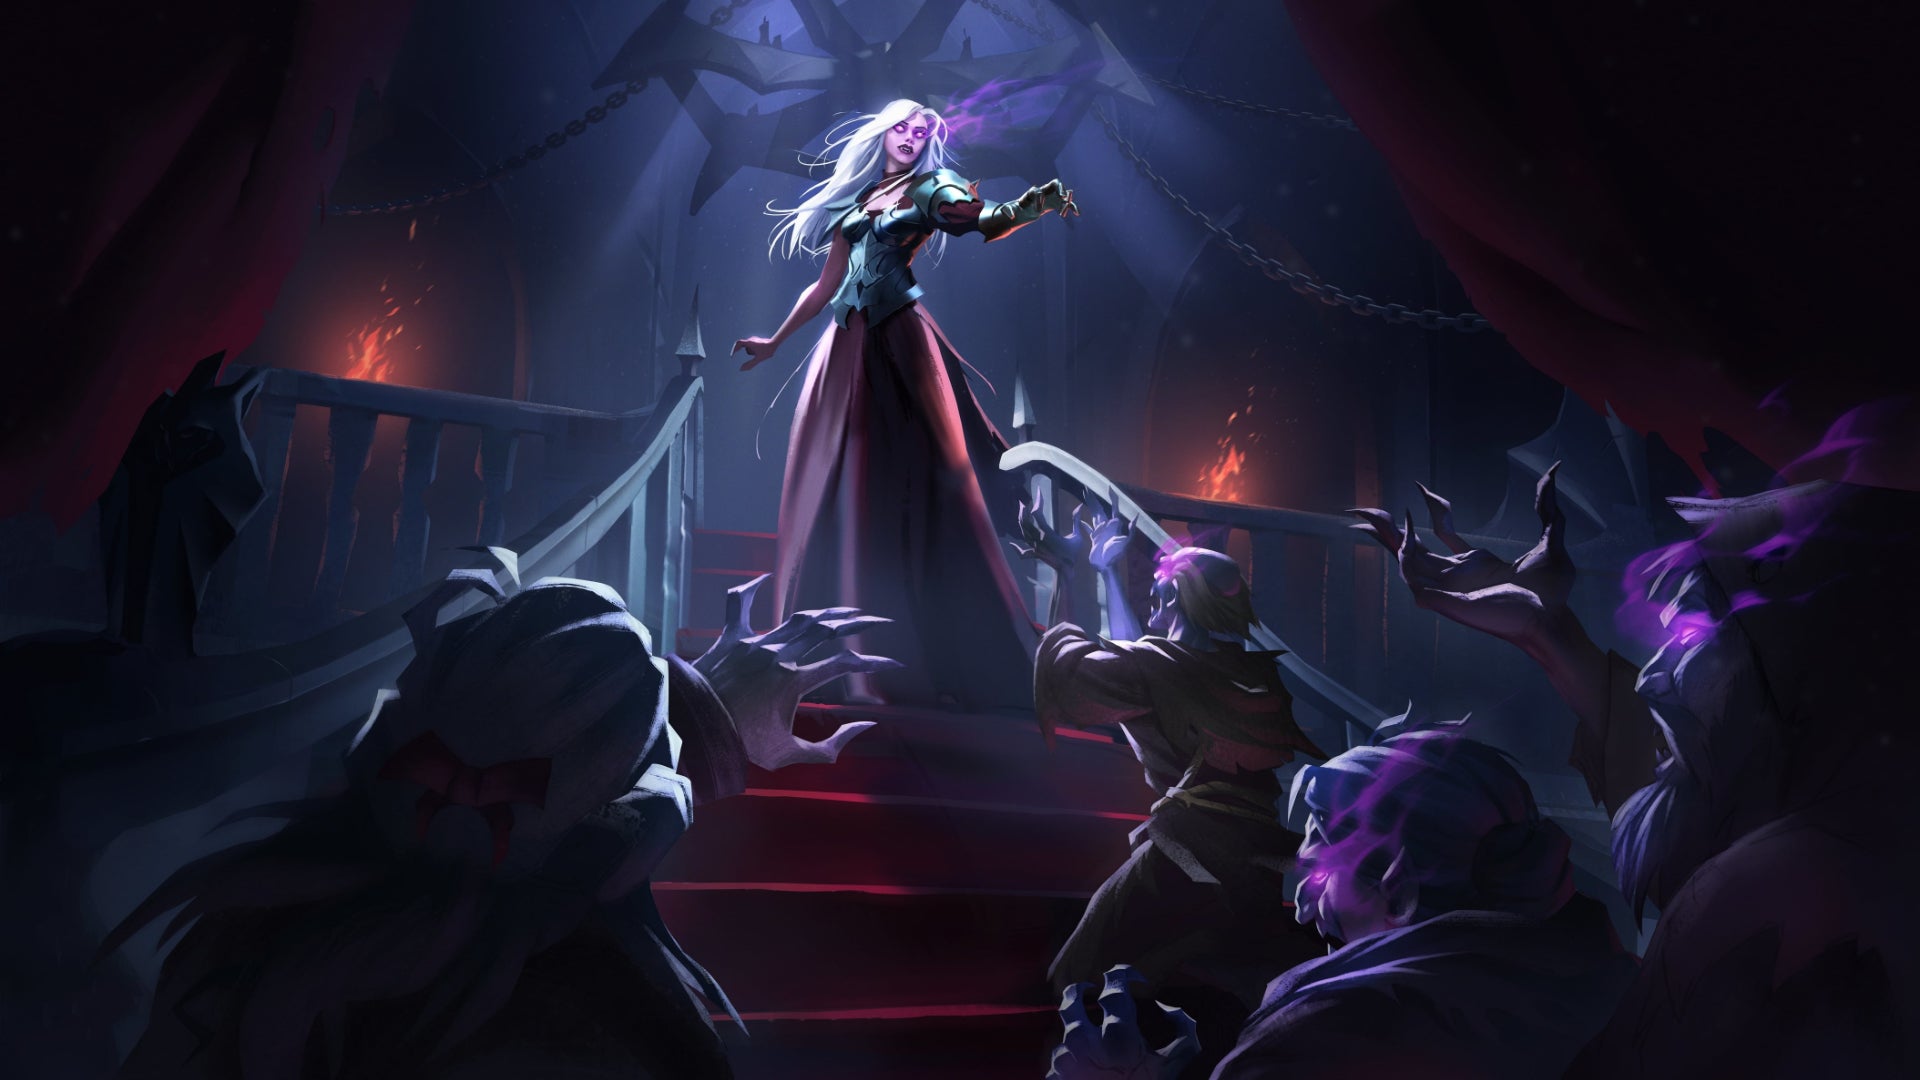 Concept art for V Rising depicting a female vampire issuing orders to her servants from her castle throne.